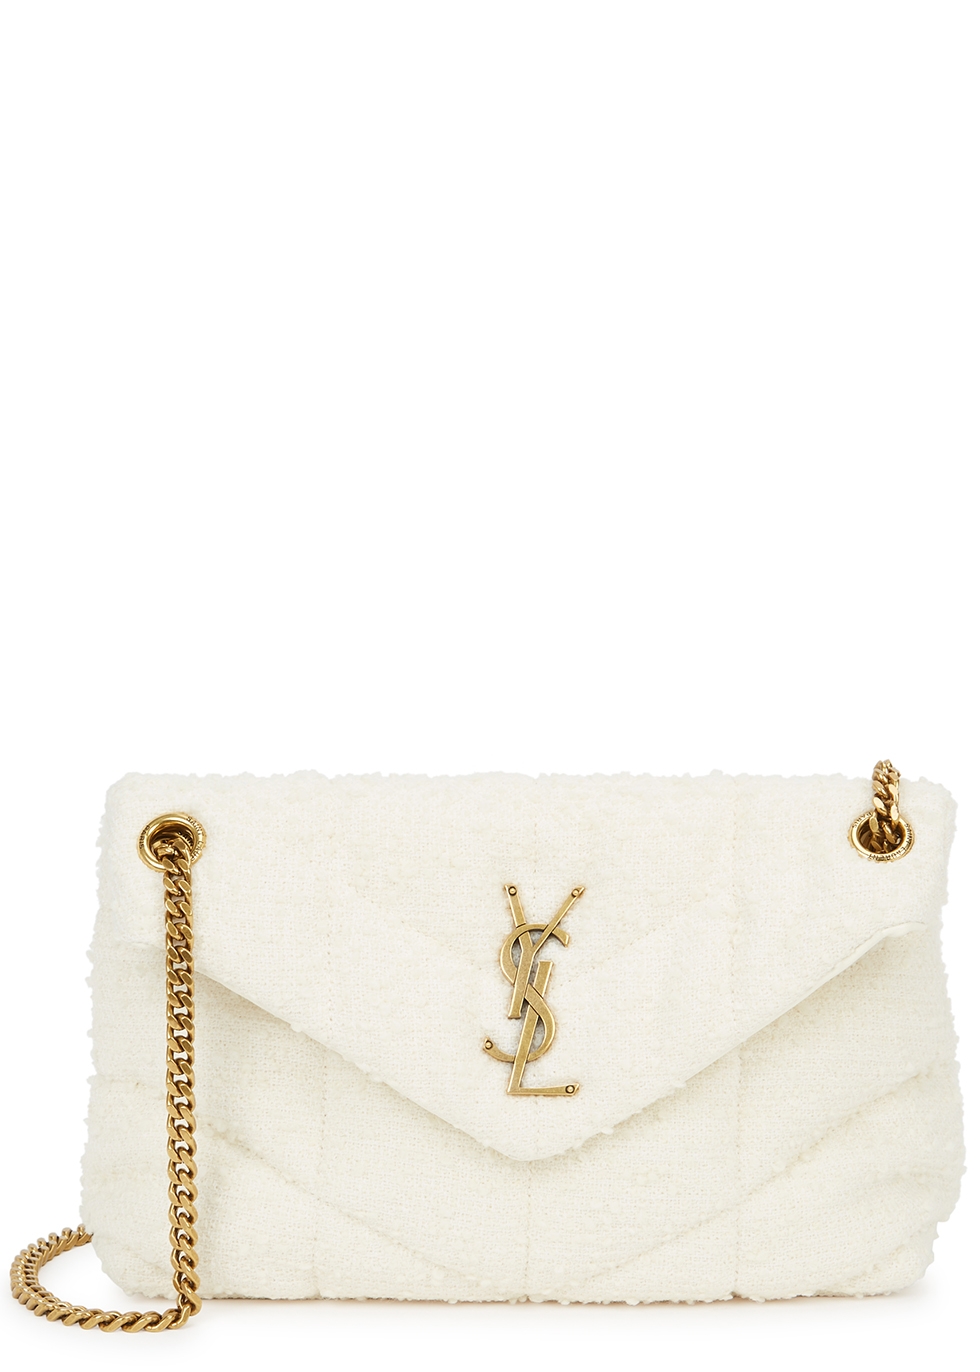 Loulou Puffer small off-white tweed shoulder bag